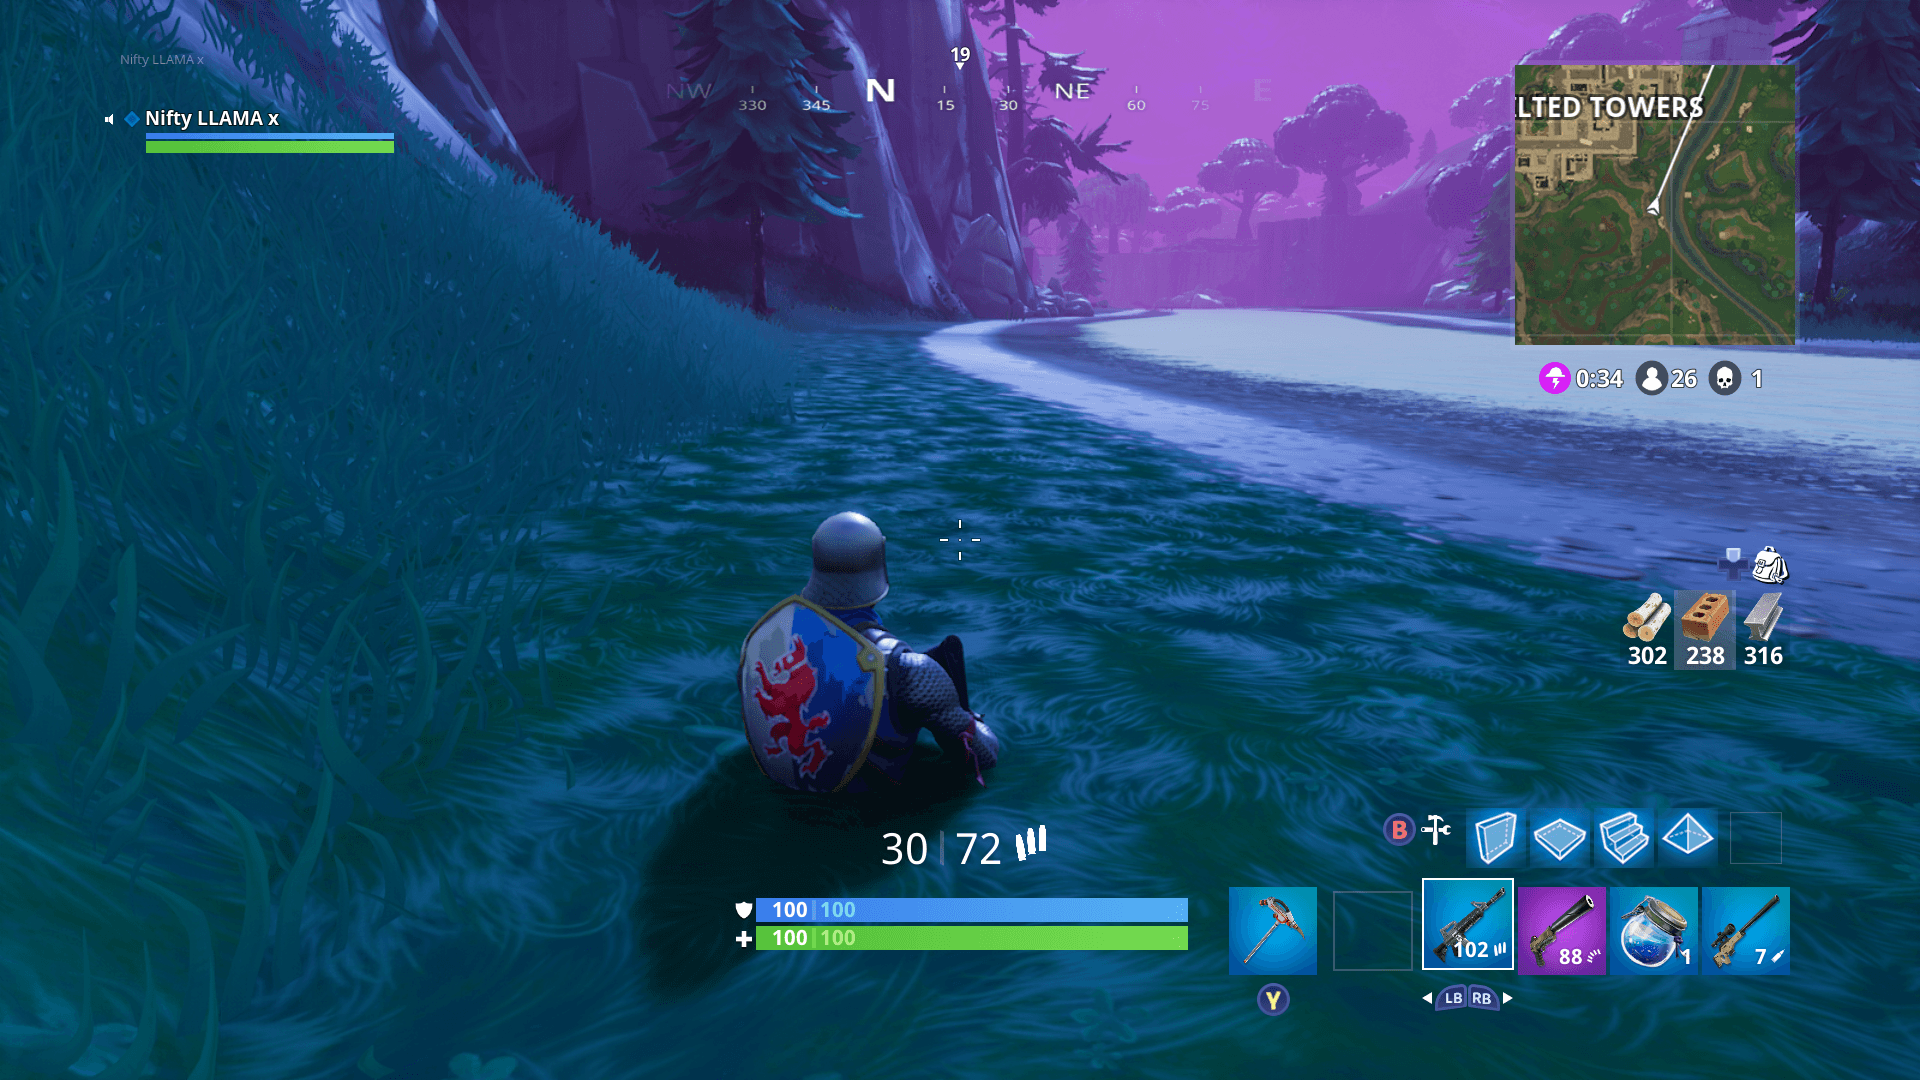 Some of the grass near the river acts as quicksand near Tilted